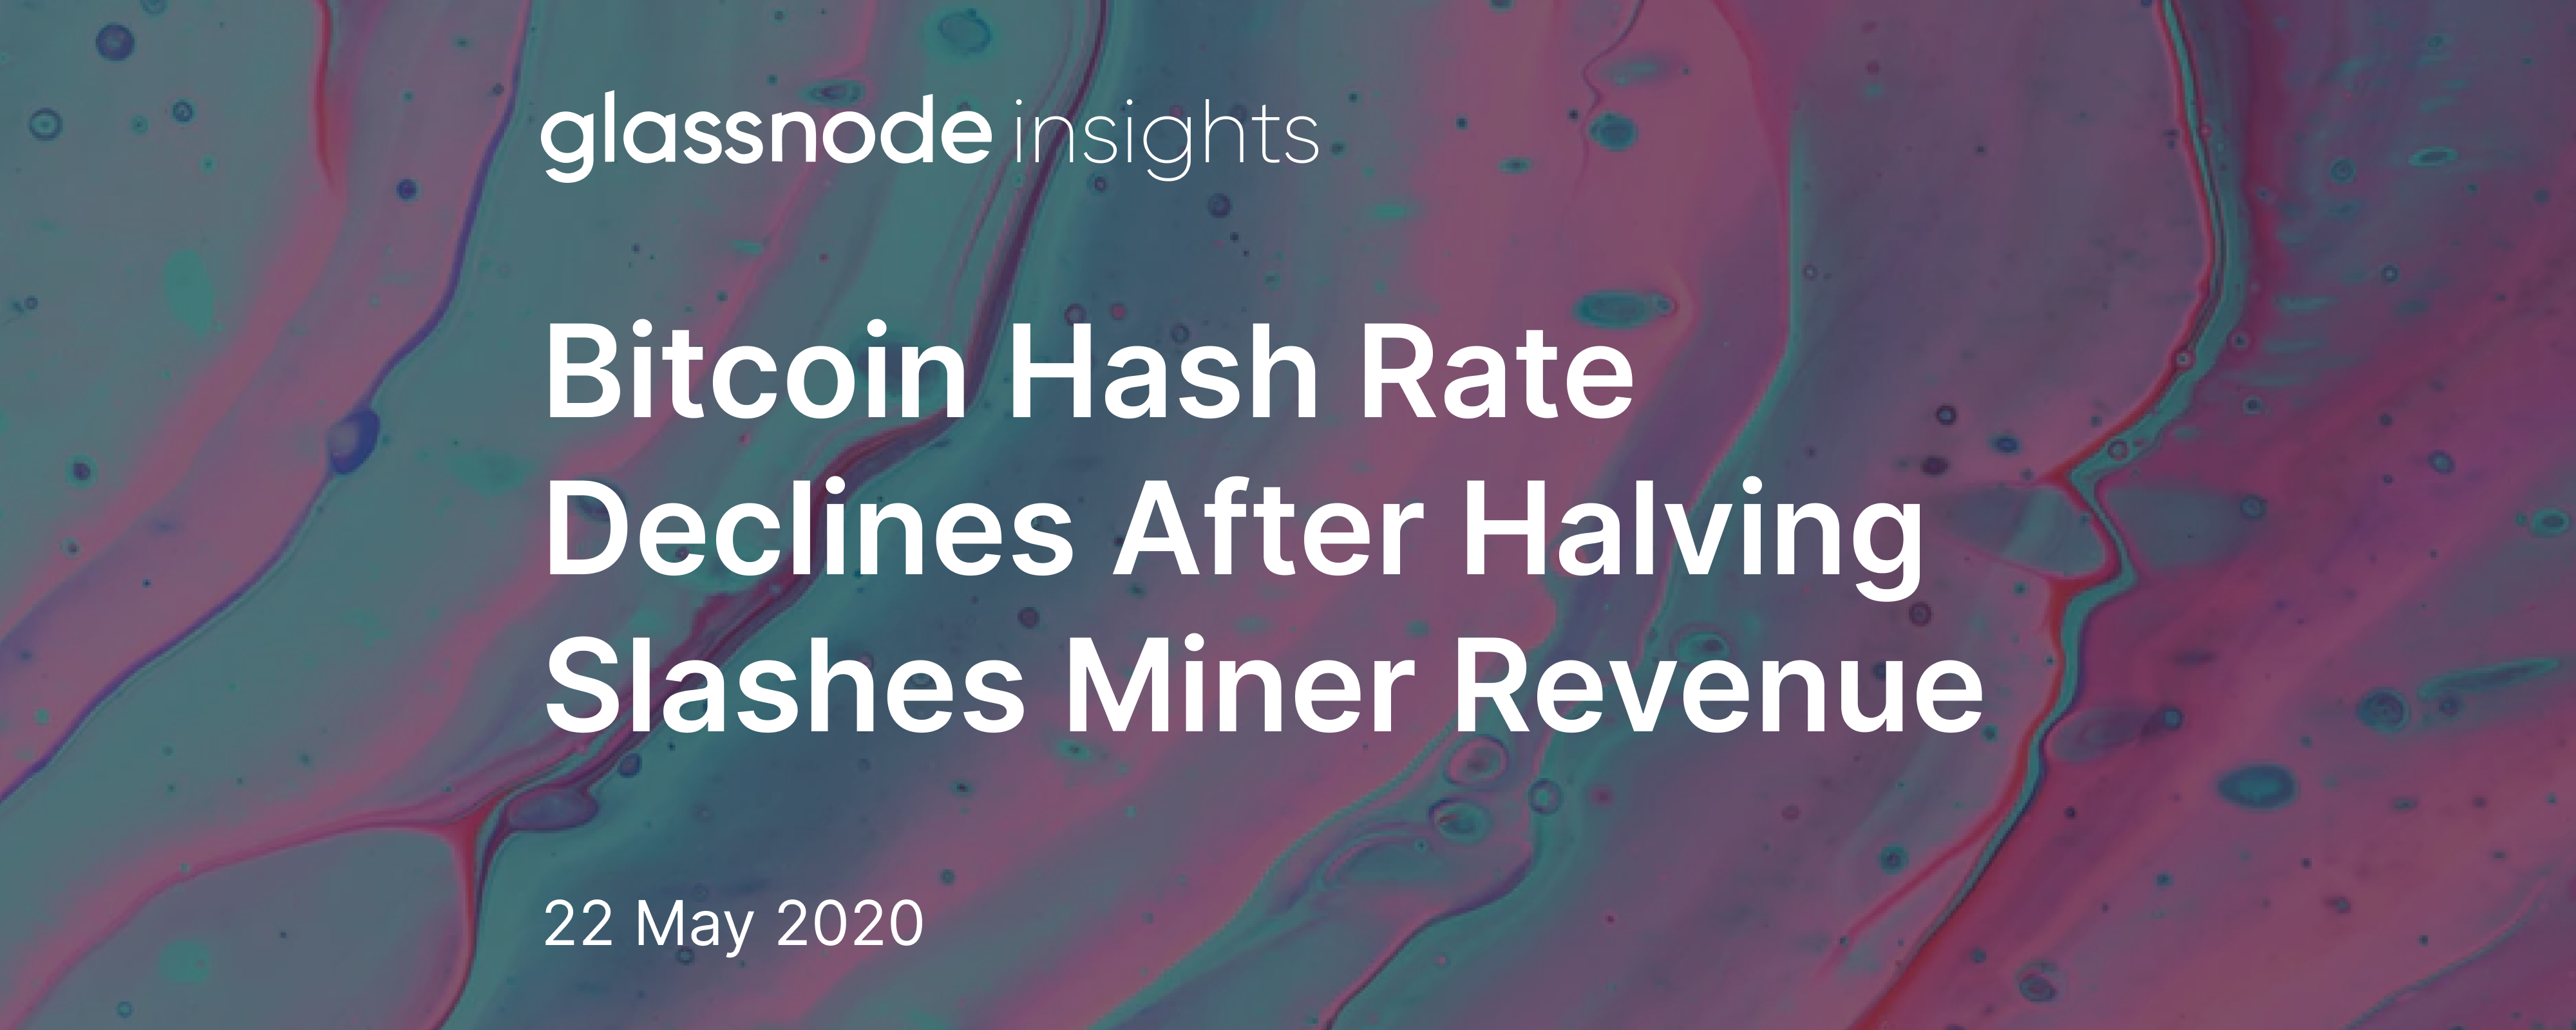 Bitcoin Hash Rate Declines After Halving Slashes Miner Revenue